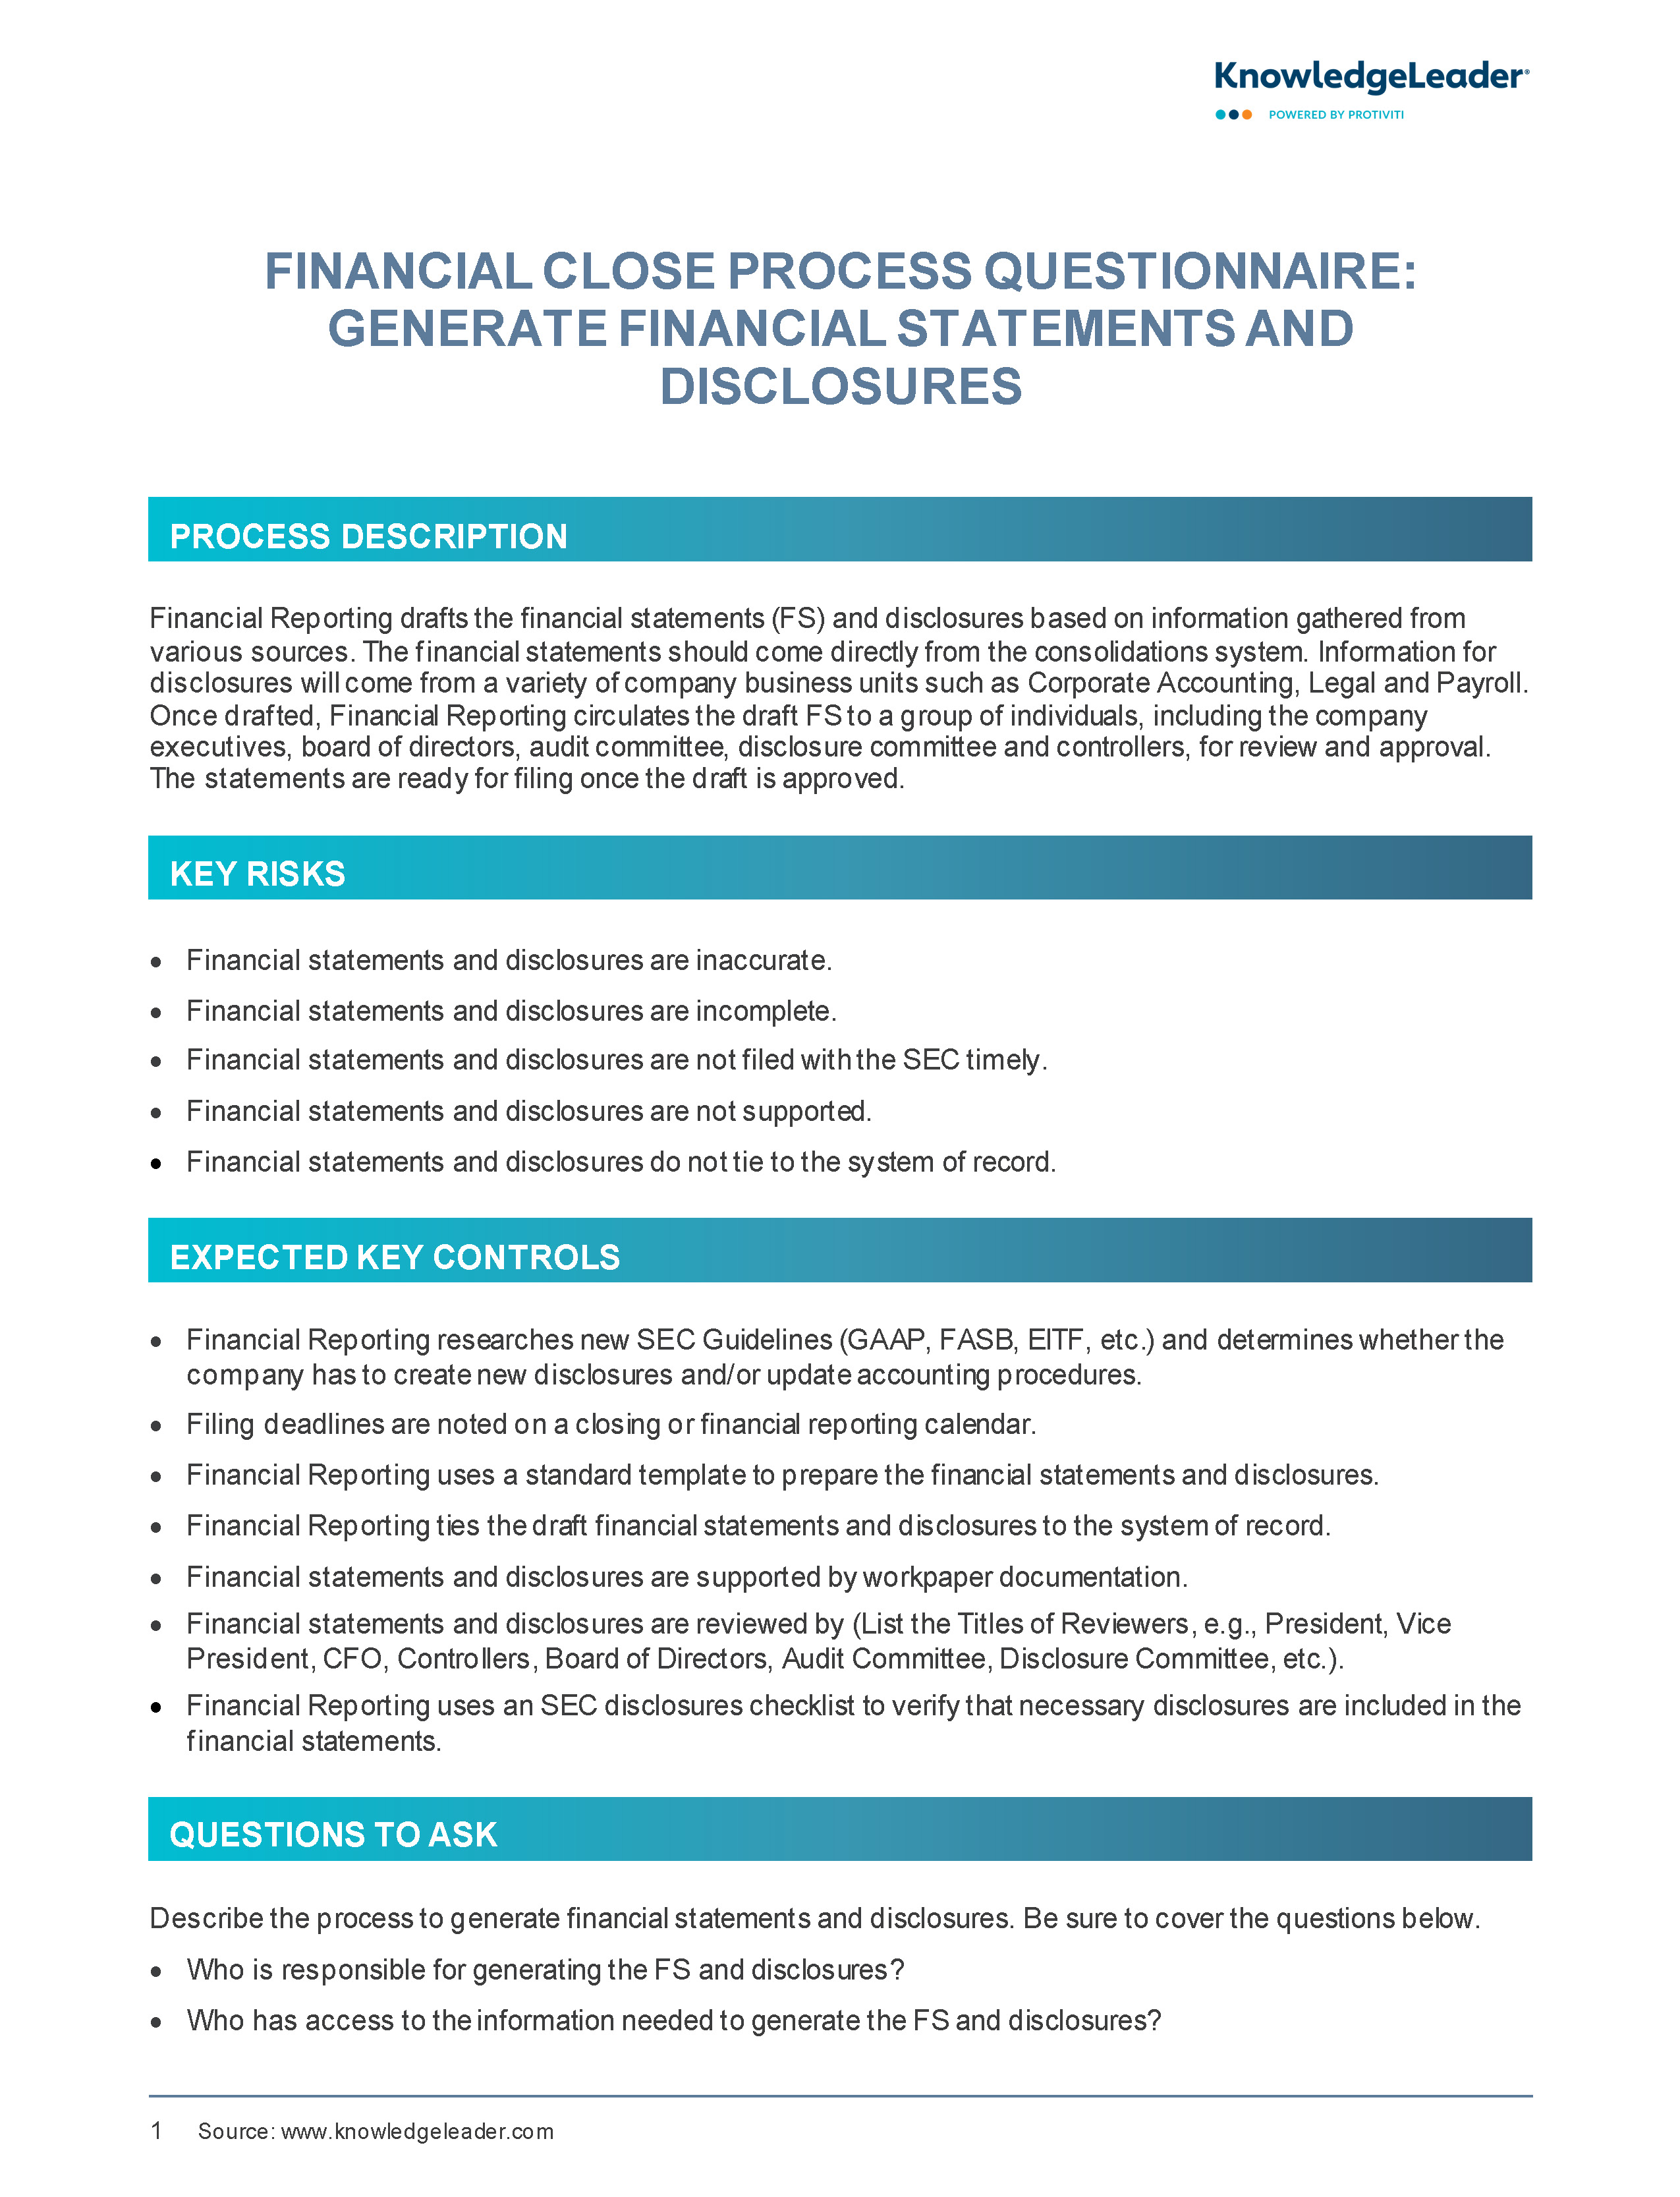 Screenshot of the first page of Financial Close Process Questionnaire - Generate Financial Statements and Disclosures